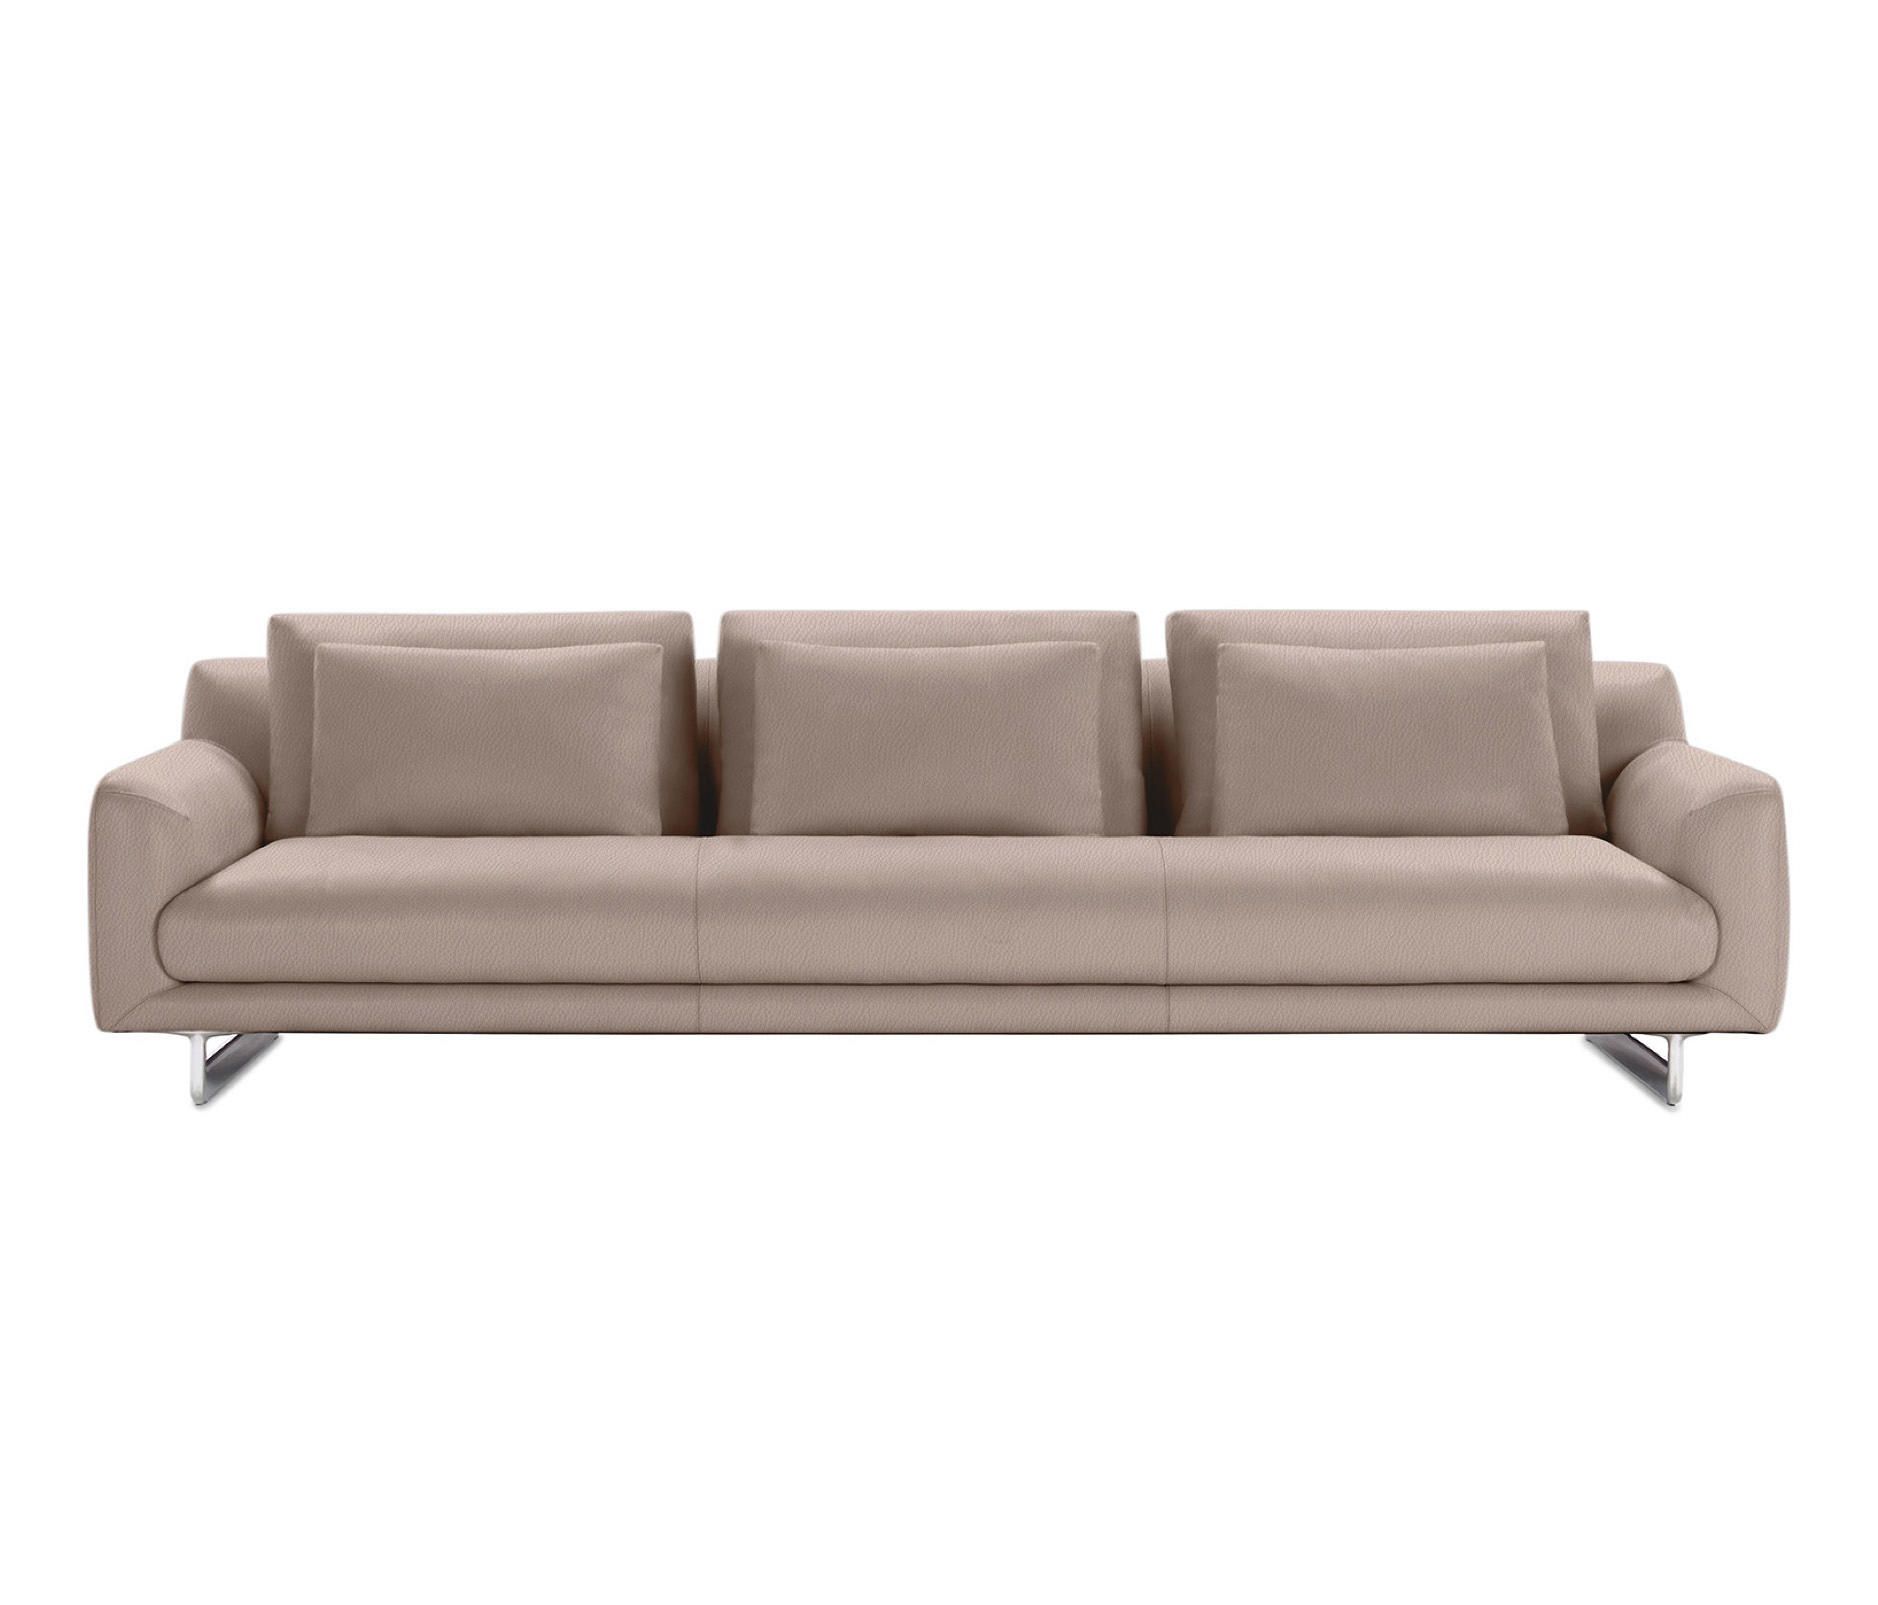 Lecco 110" Sofa & Designer Furniture | Architonic With 110" Oversized Sofas (View 2 of 20)